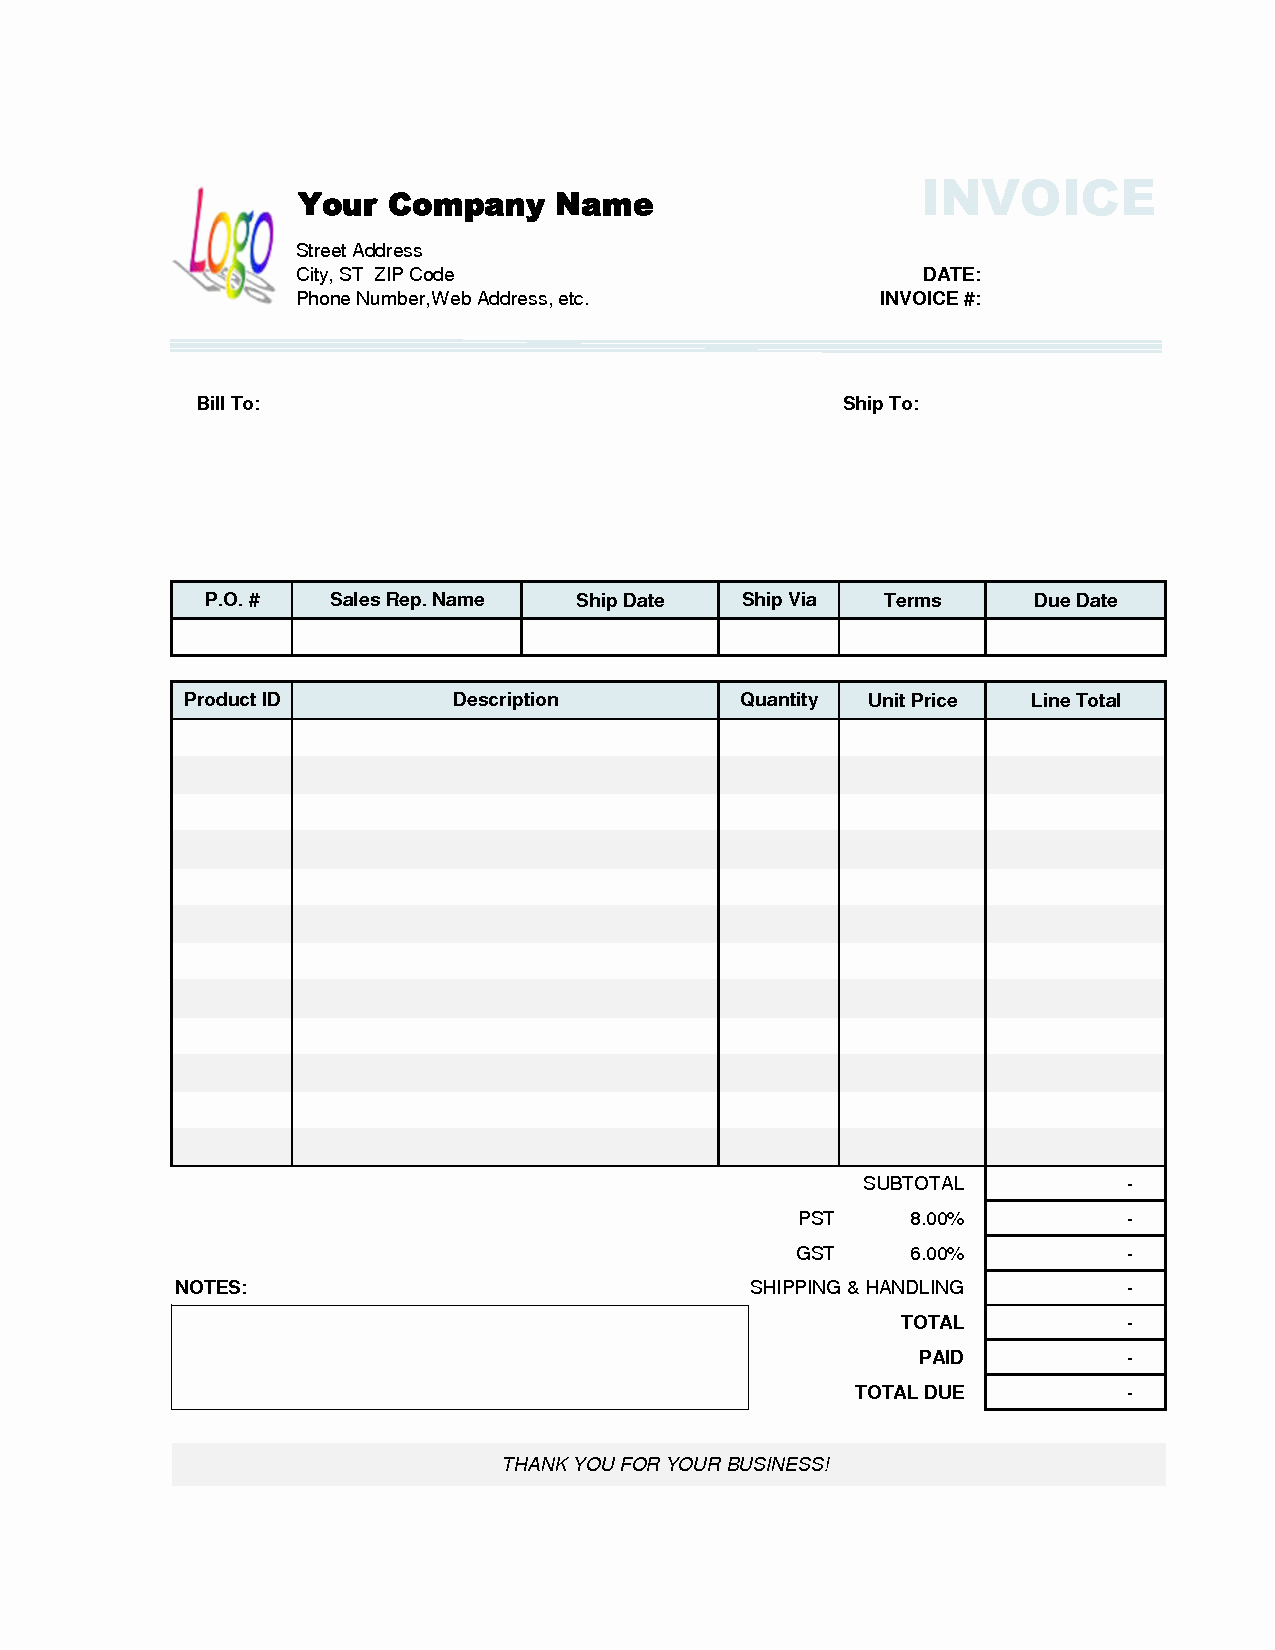 Excel Invoice Template with Logo Unique Pany Invoice Template